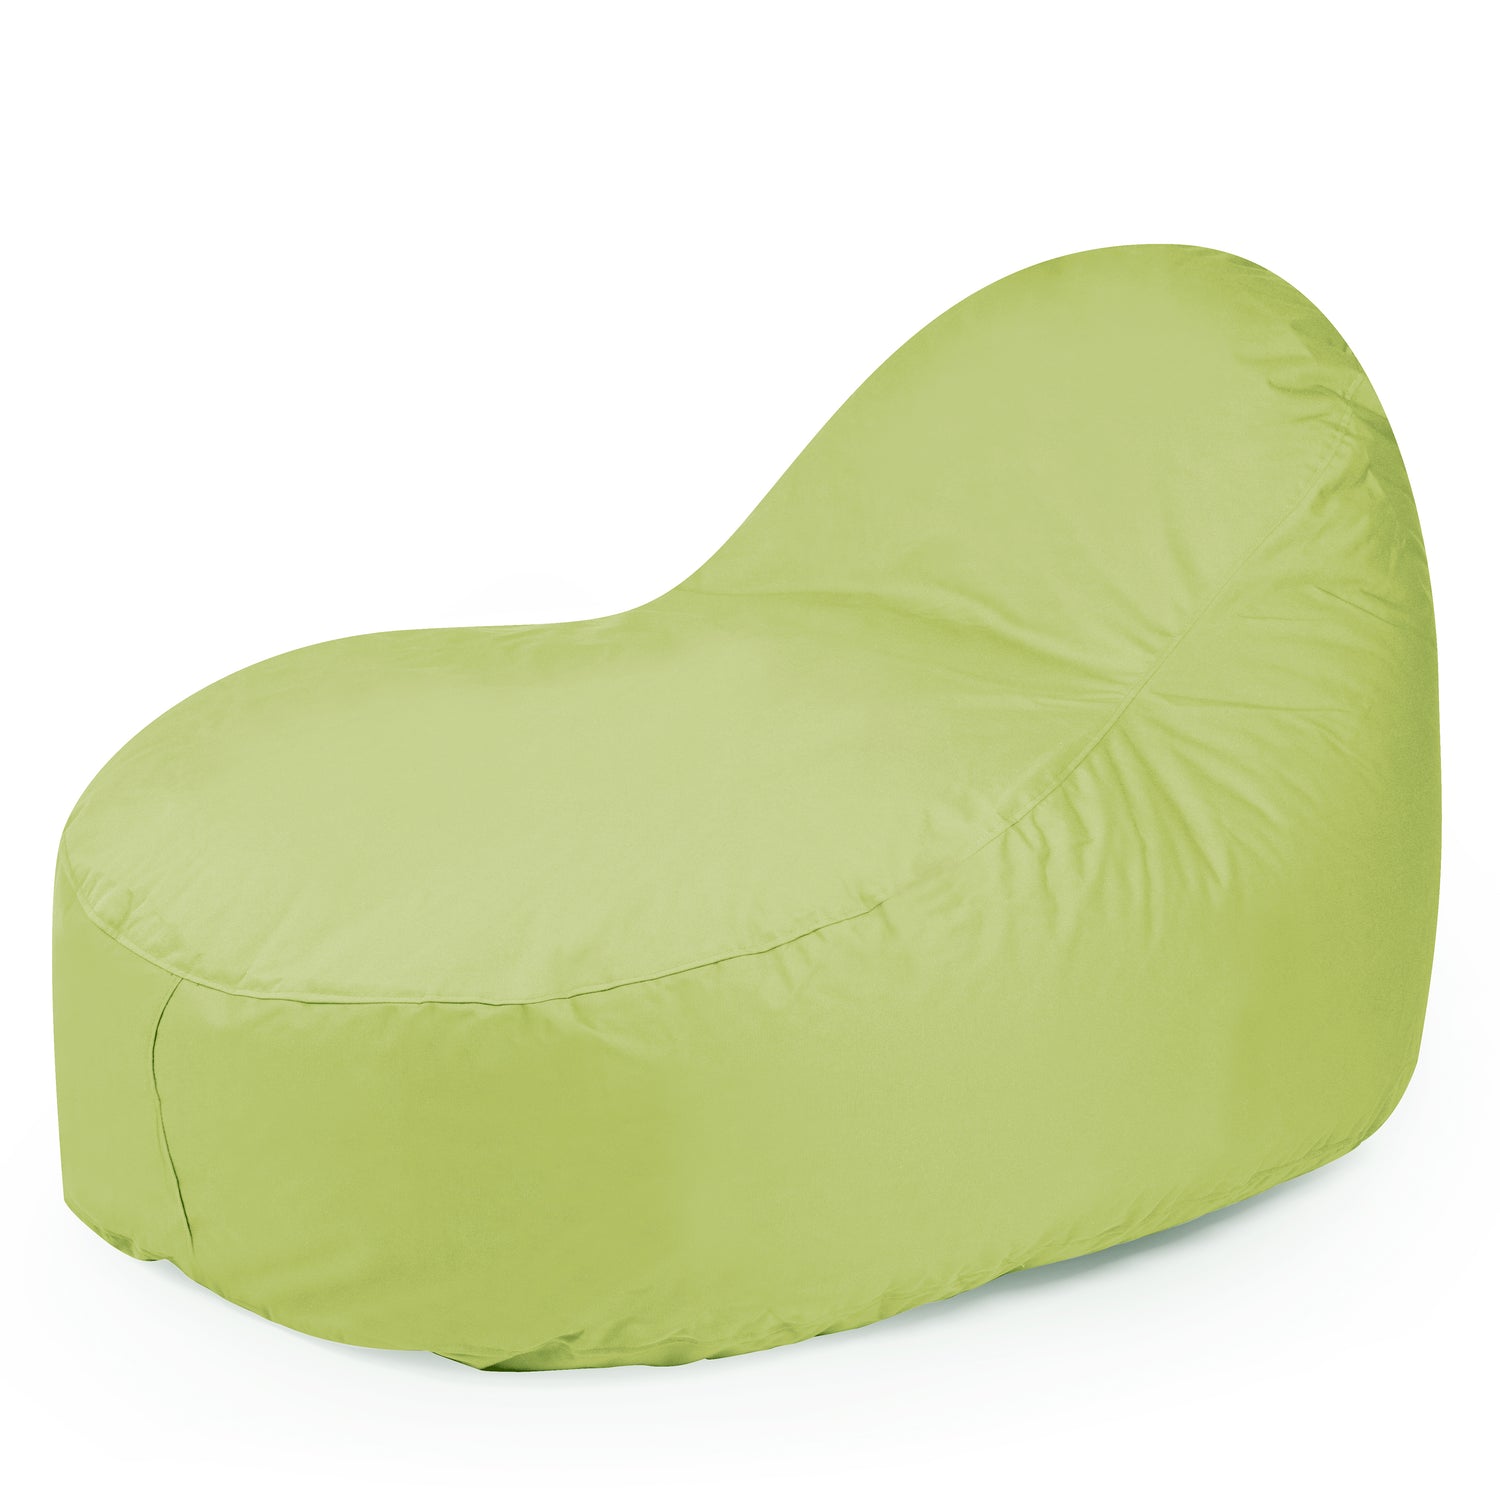 Outbag pouf poire extra large Slope XL